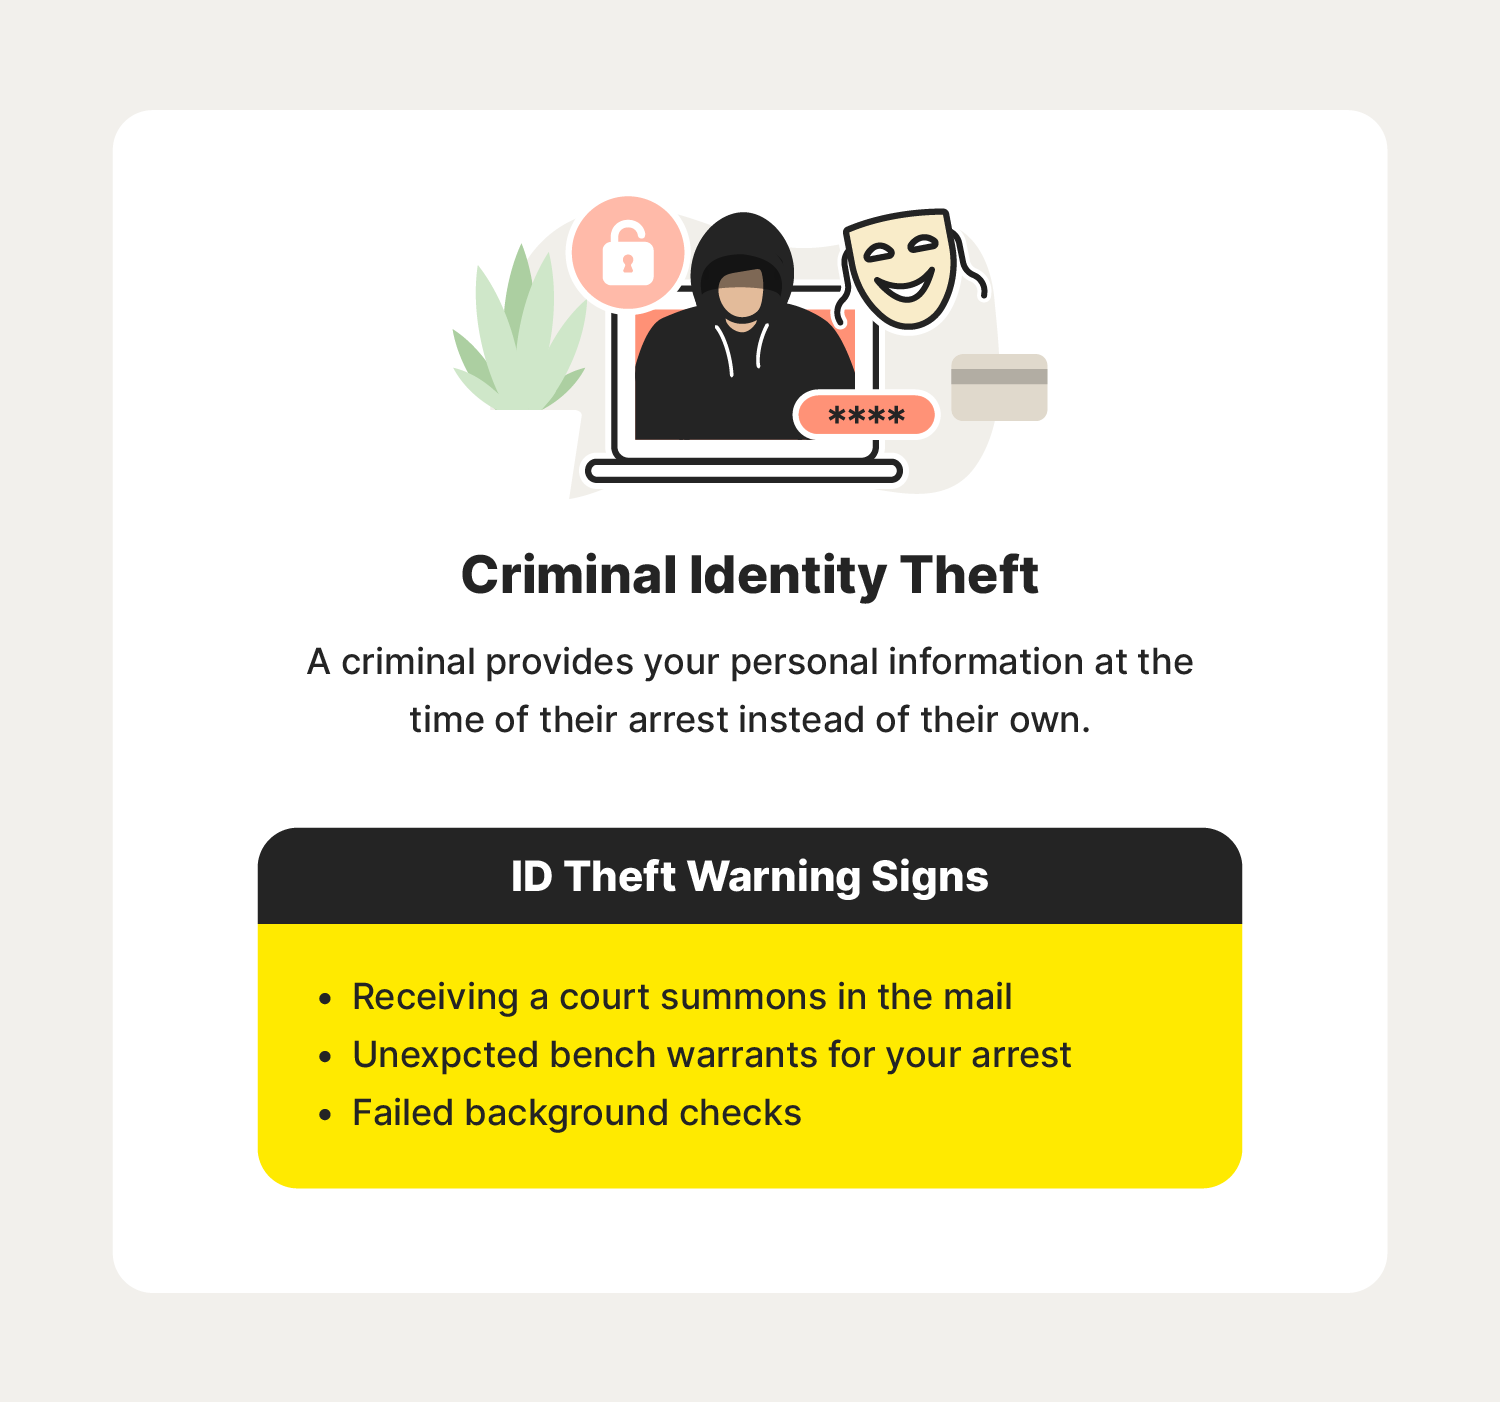 A graphic describes criminal identity theft, a type of identity theft to keep an eye on when learning how to avoid identity theft.